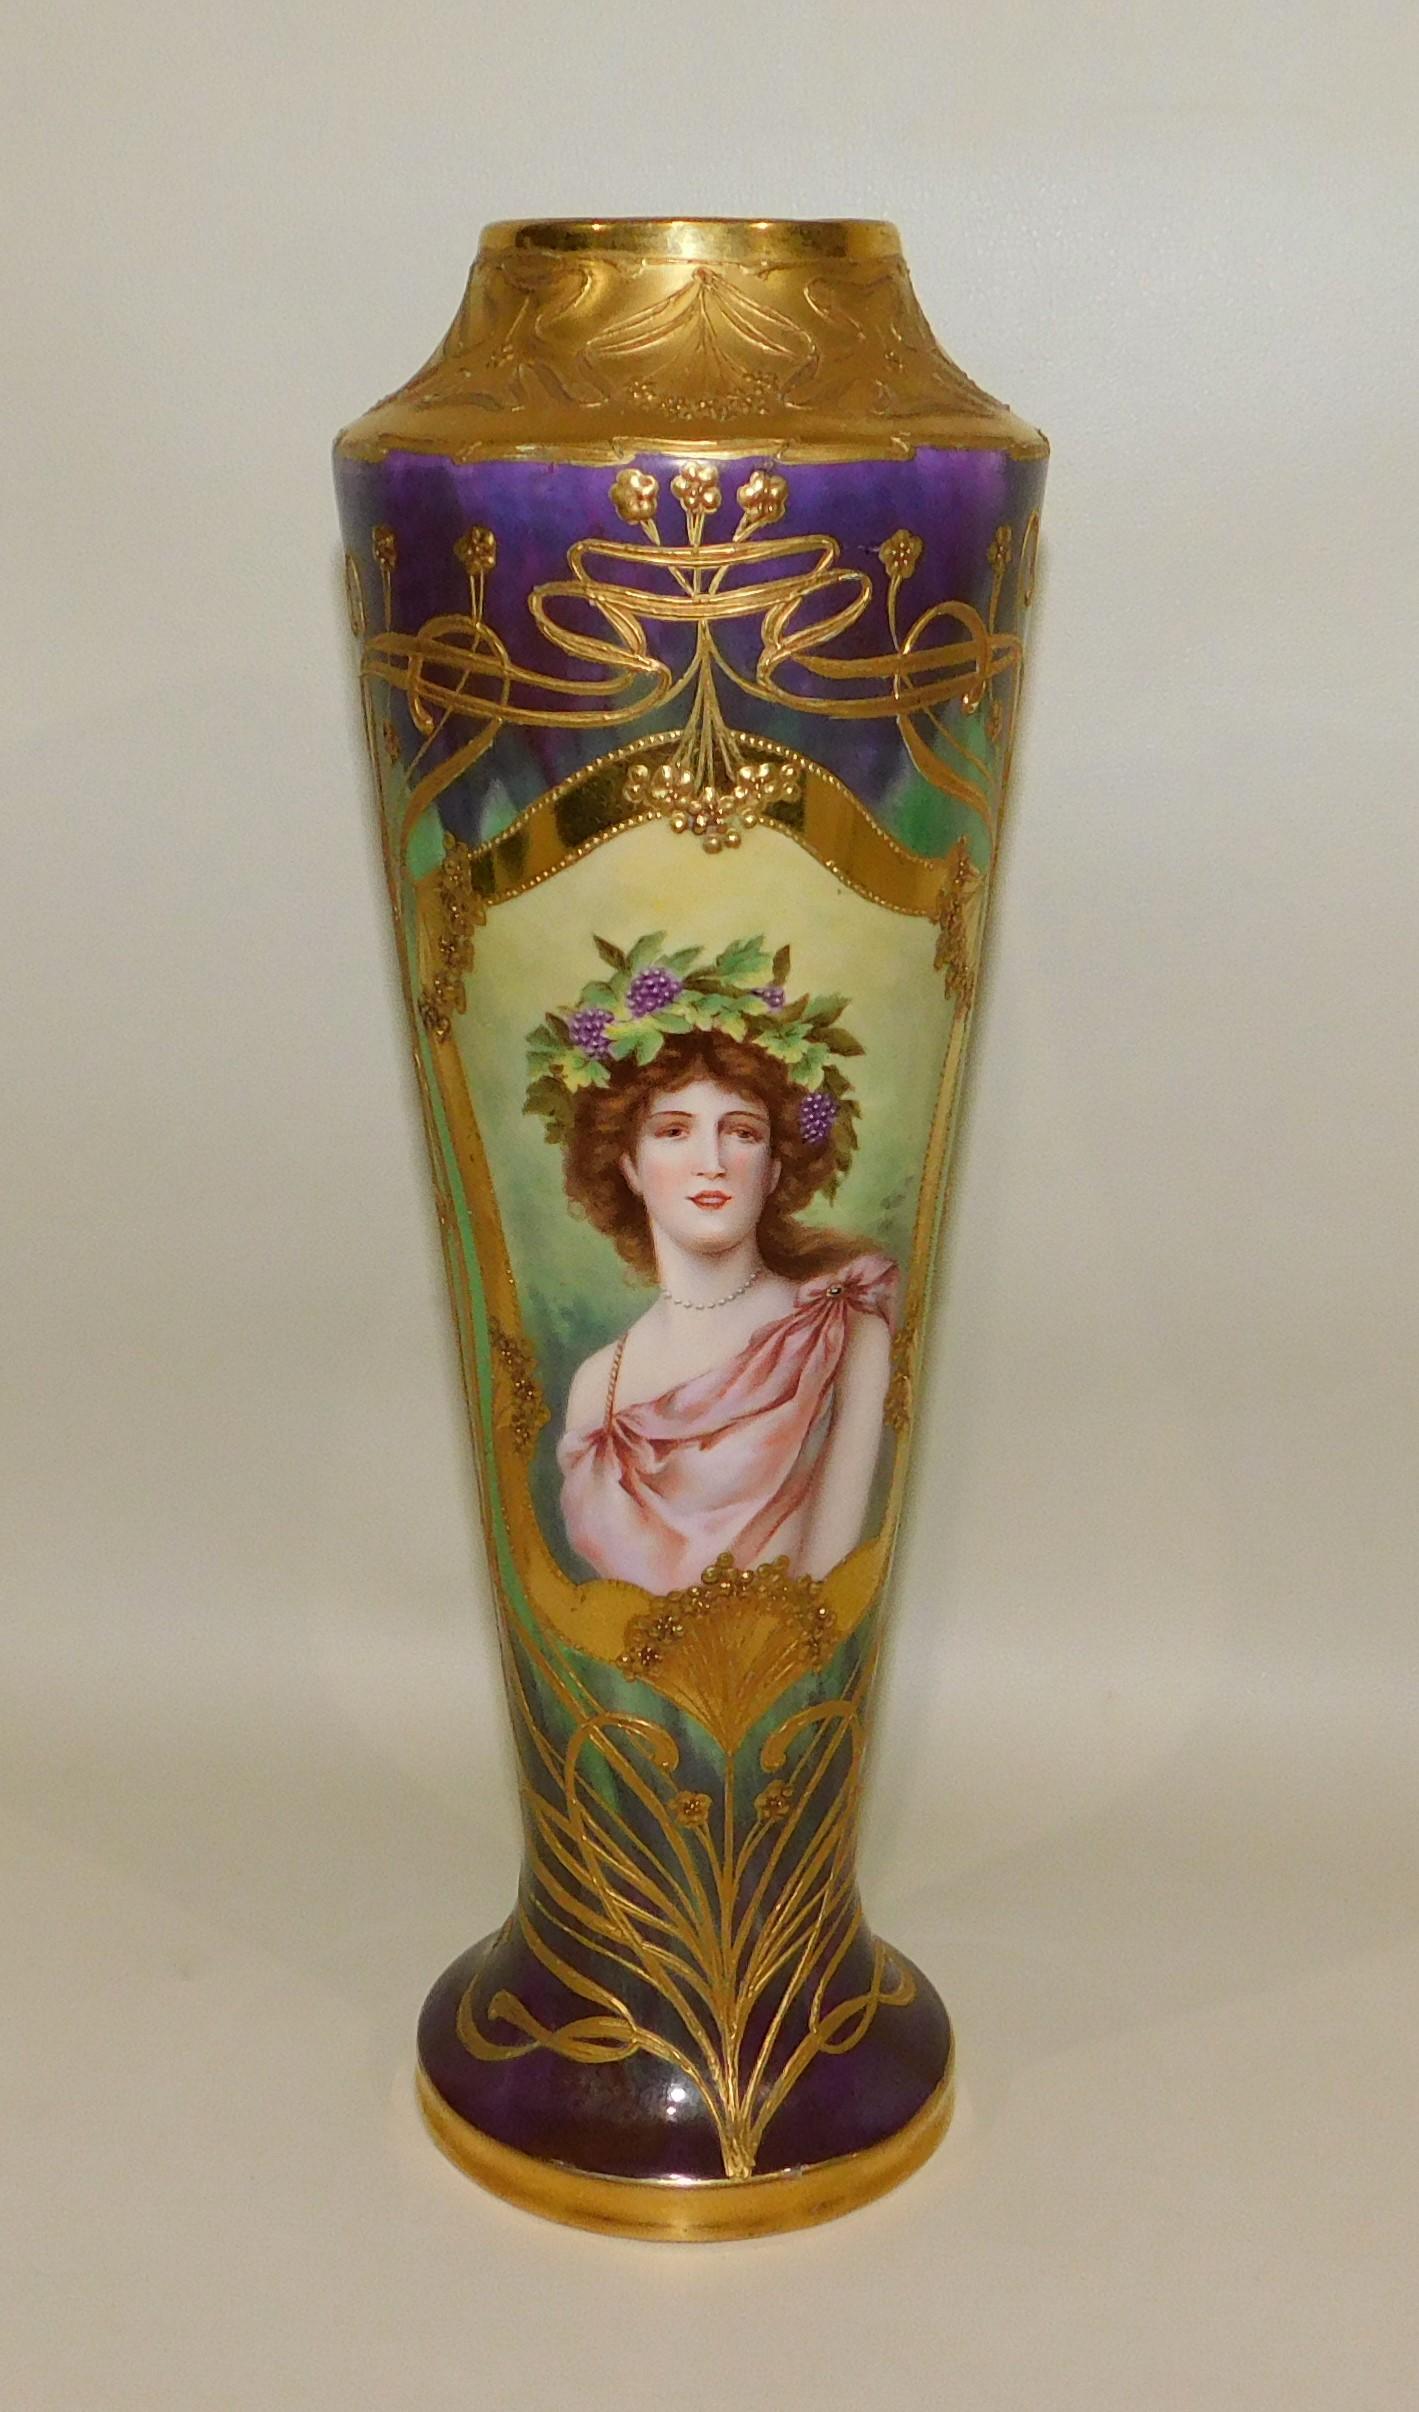 19th century Royal Vienna hand painted porcelain portrait drill vase. The body is covered with high quality gilt and raised gilt Art Nouveau style decoration. The center features an oval cartouche with a painting of a beautiful woman. The bottom has